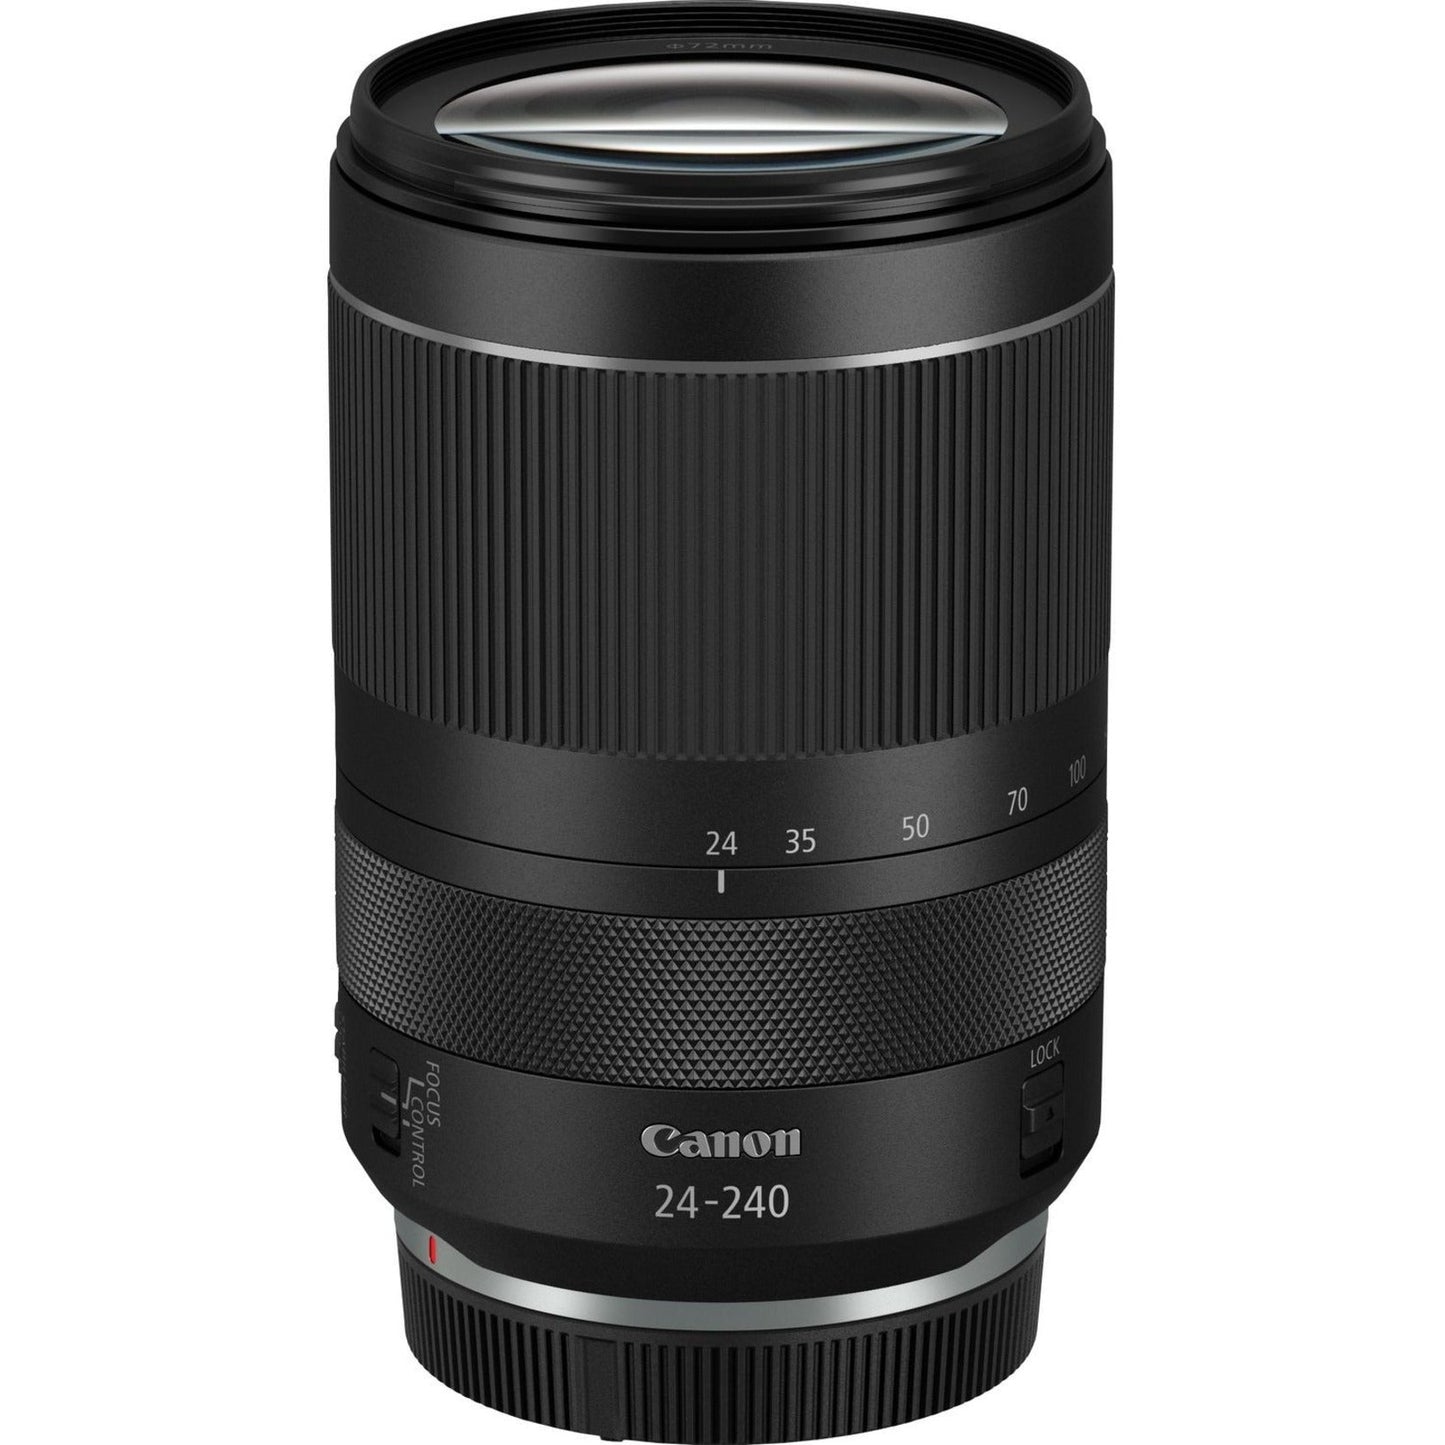 Canon - 24 mm to 240 mmf/6.3 - Standard Zoom Lens for Canon RF